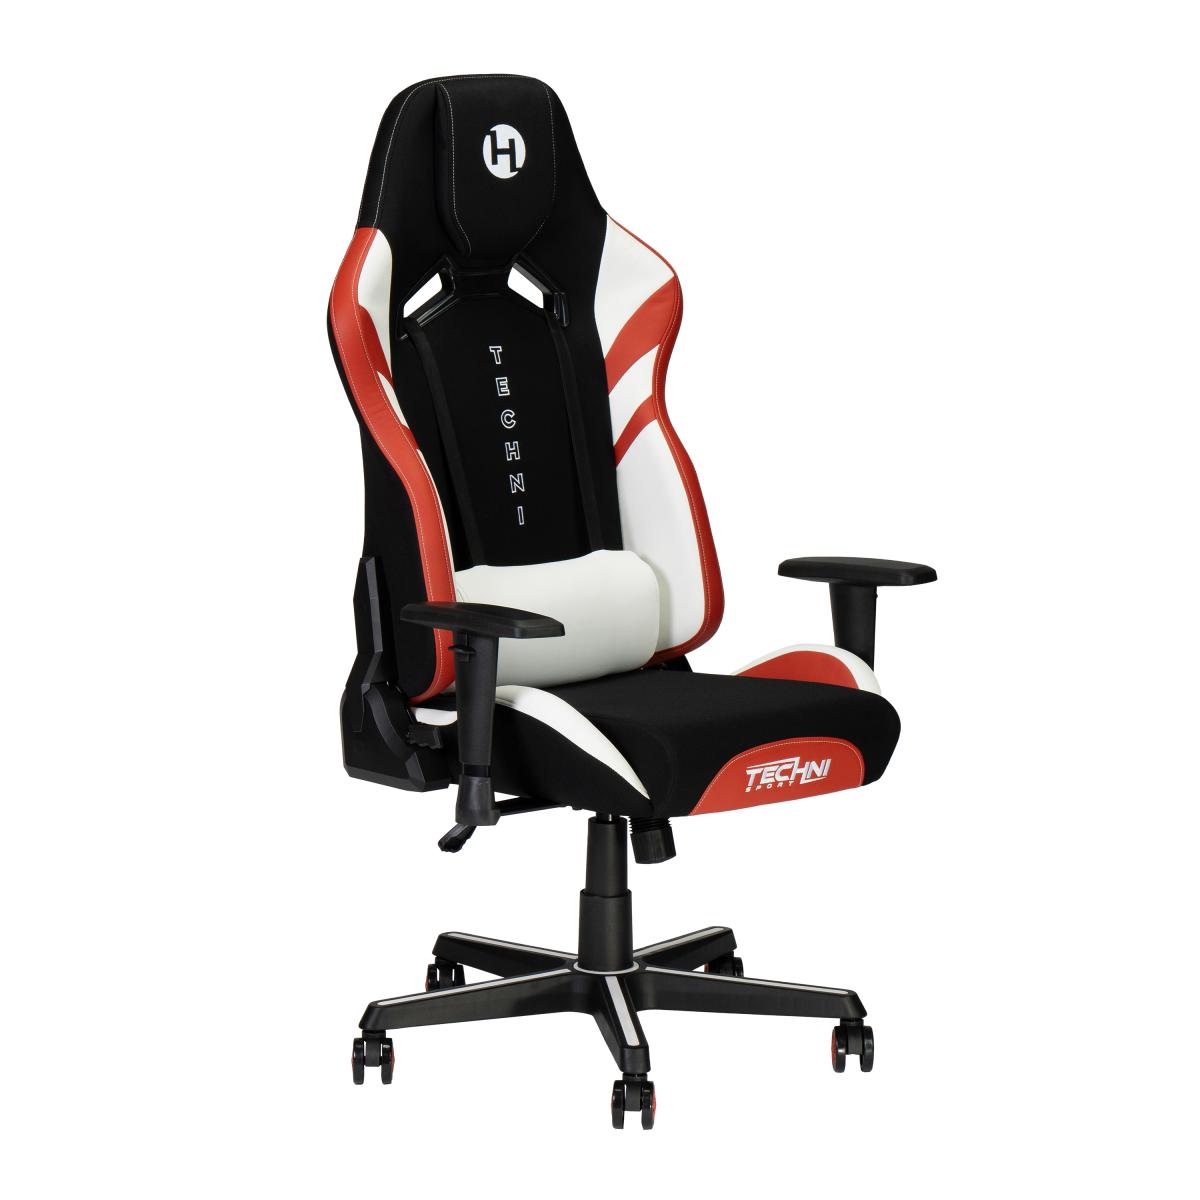 Techni Sport Tsf72 Echo Gaming Chair - Black with Red & White